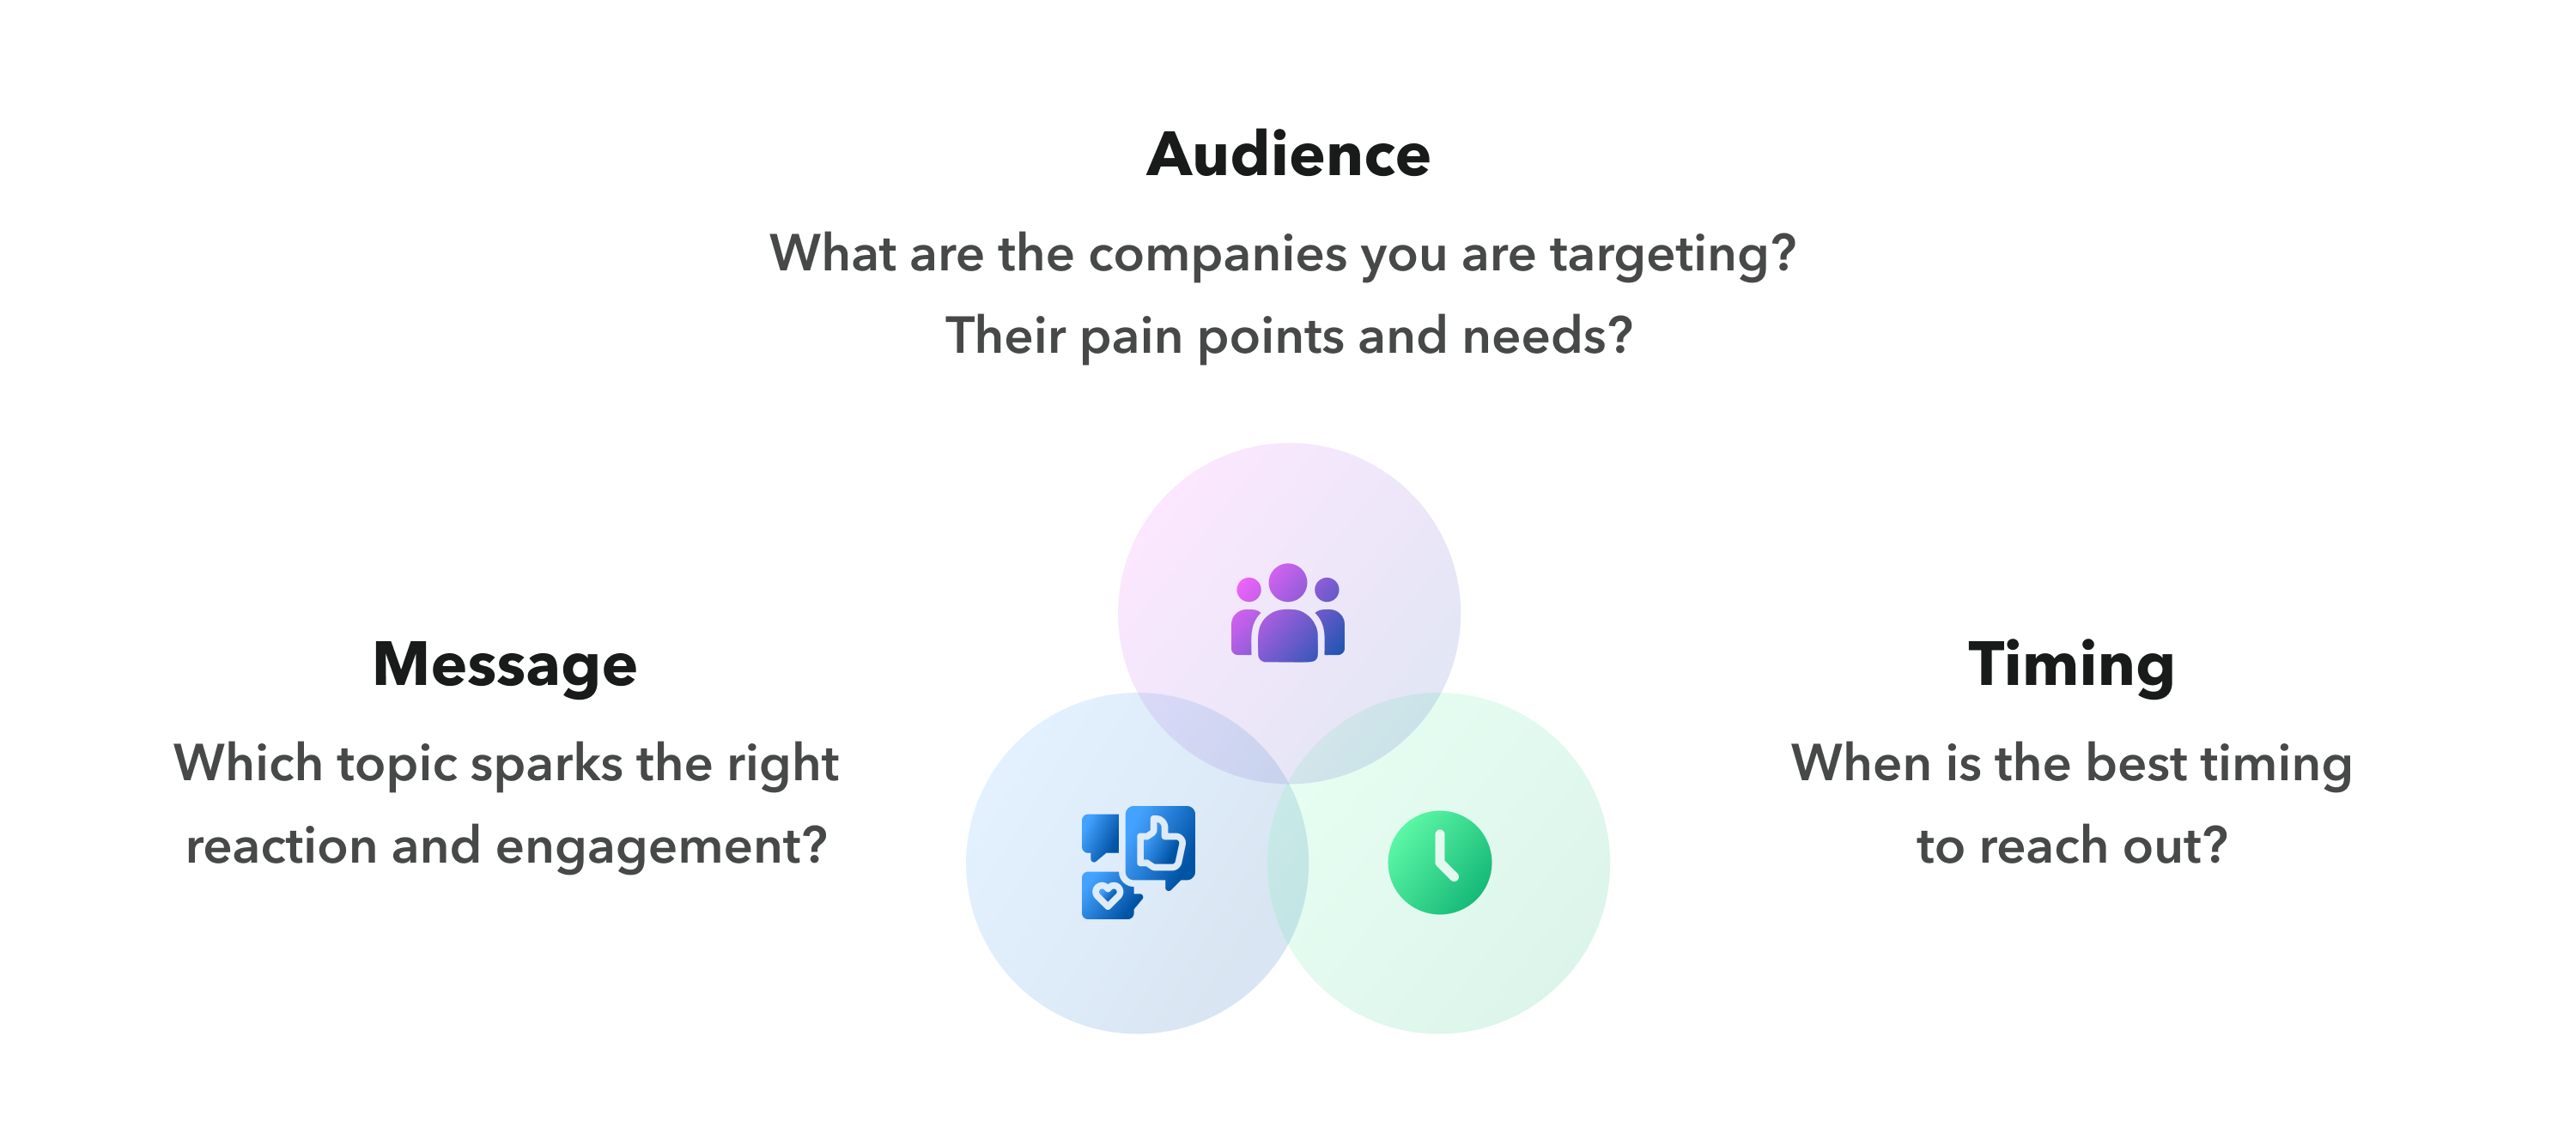 intent data help sales and marketing know more about the audience message and timing